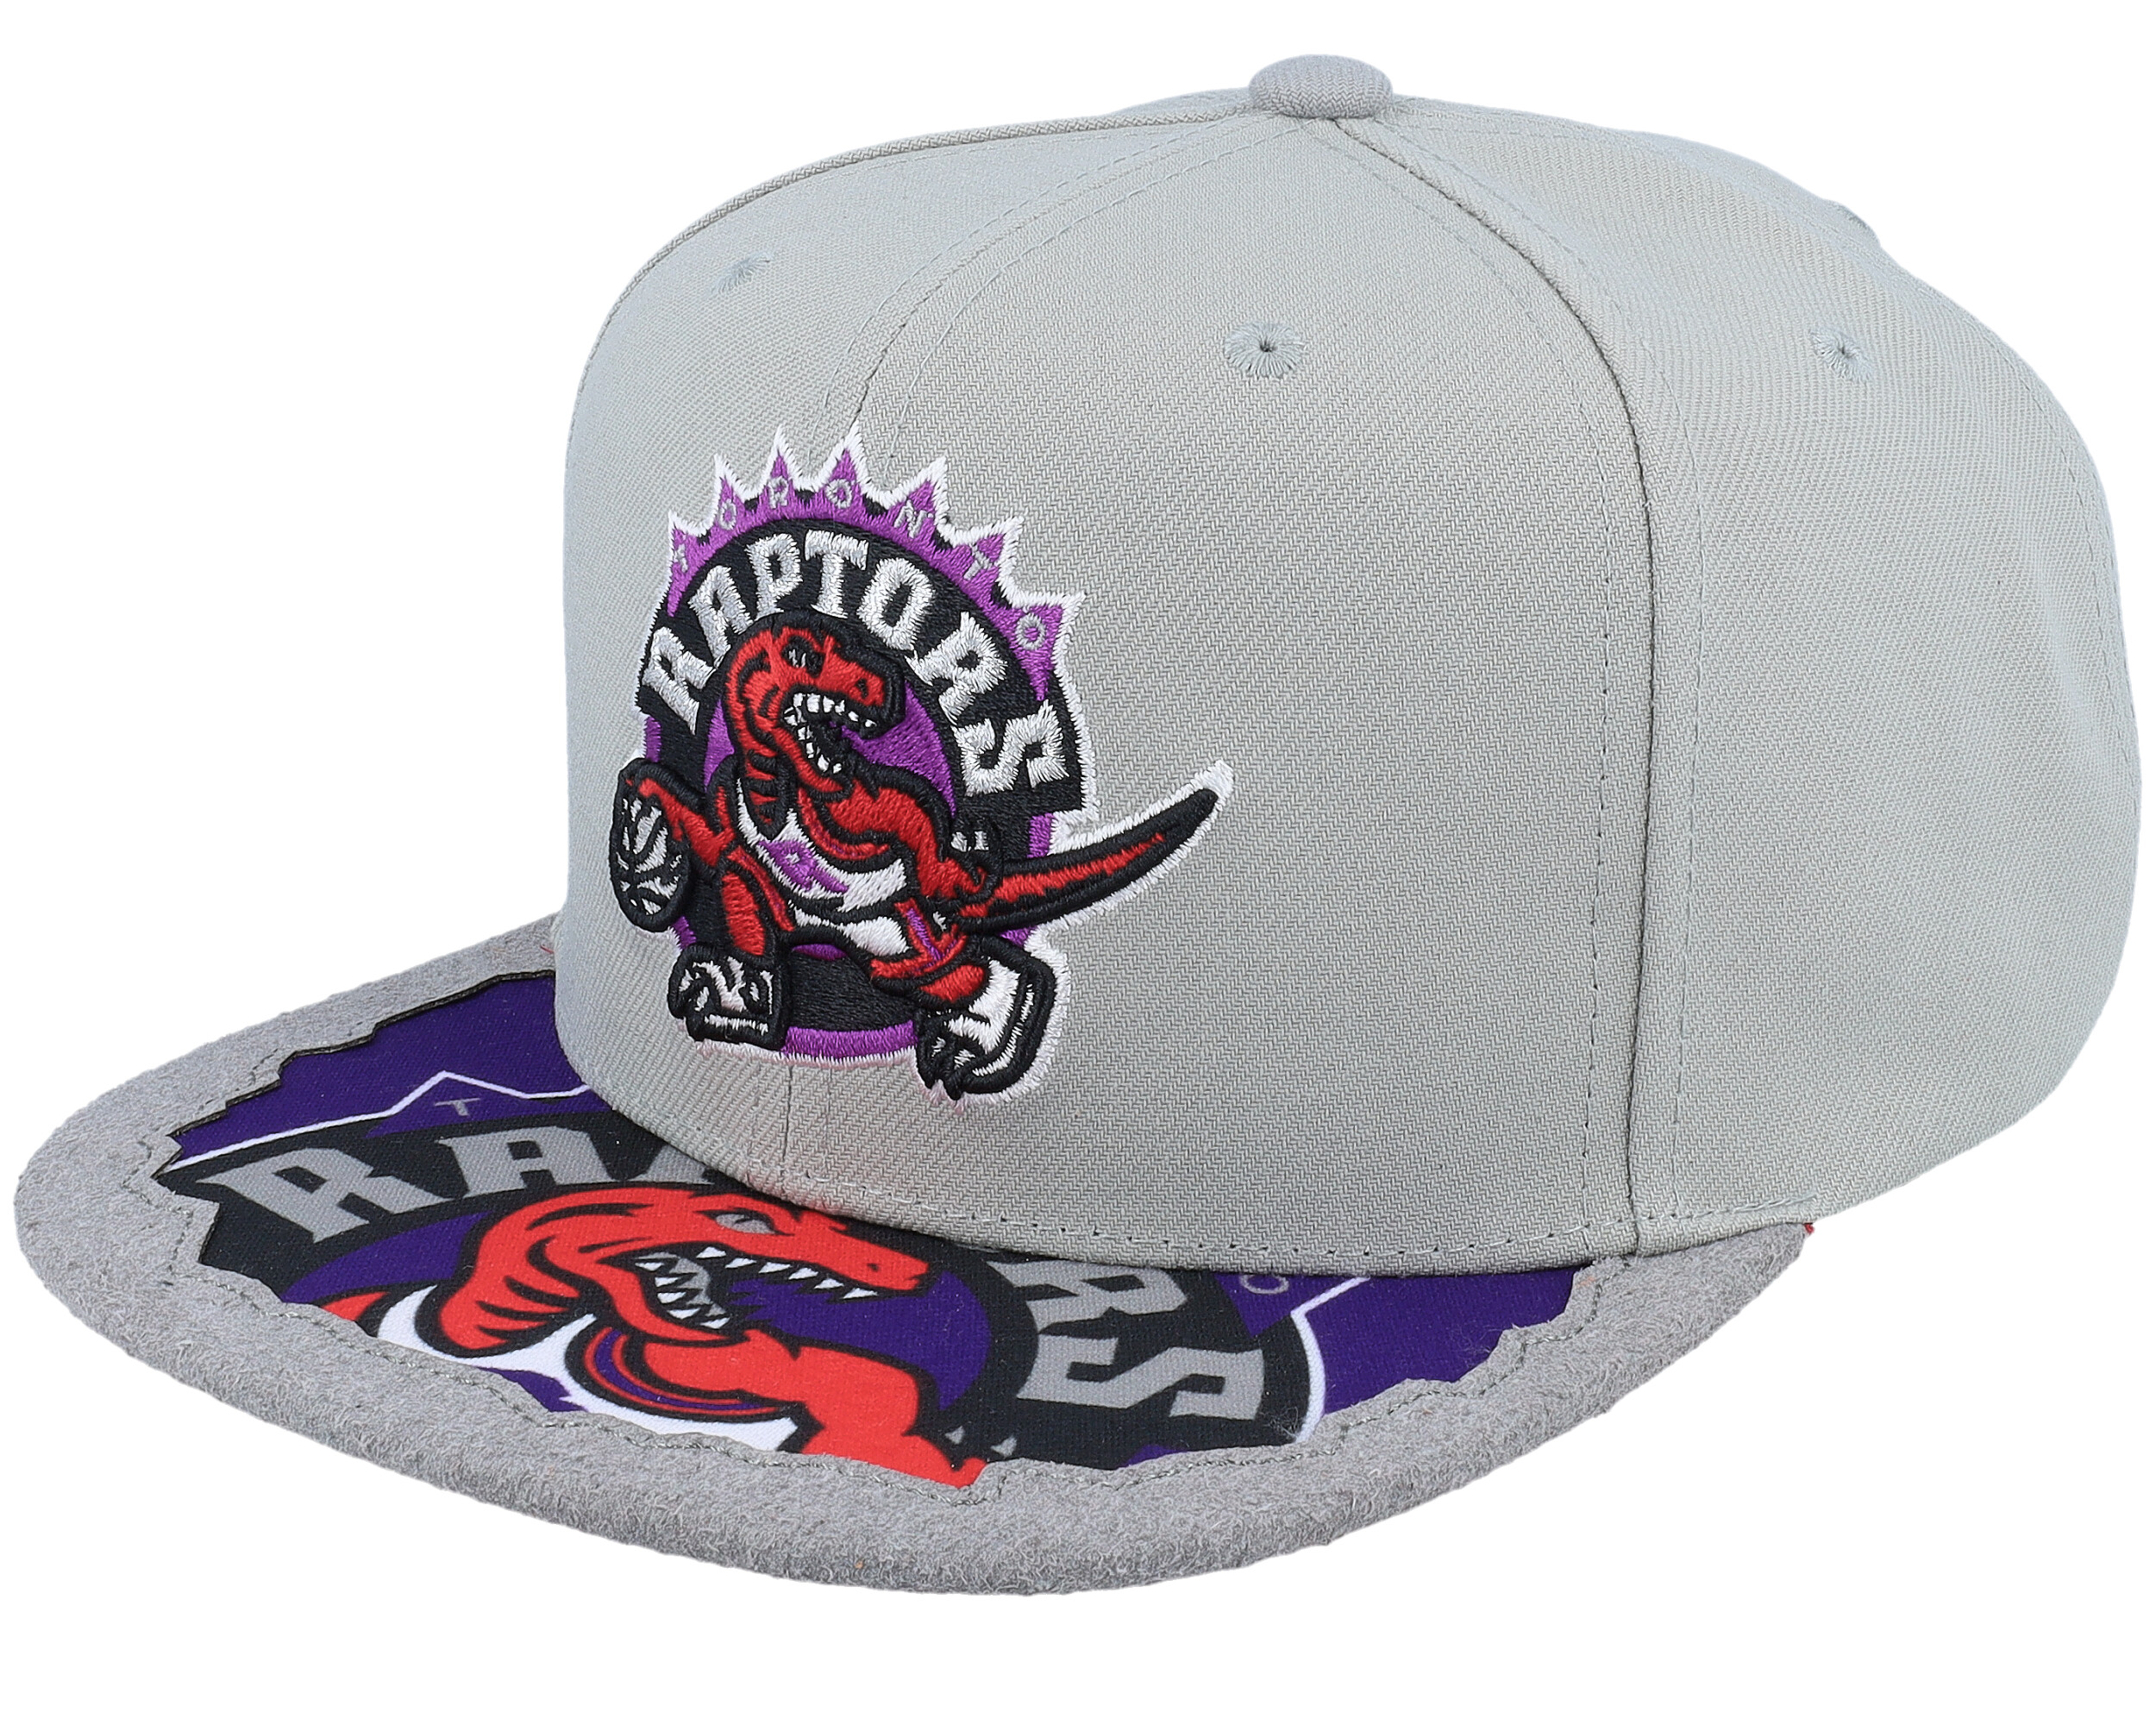 Mitchell & Ness Toronto Raptors Large Logo Fitted Hat Cap - Gray